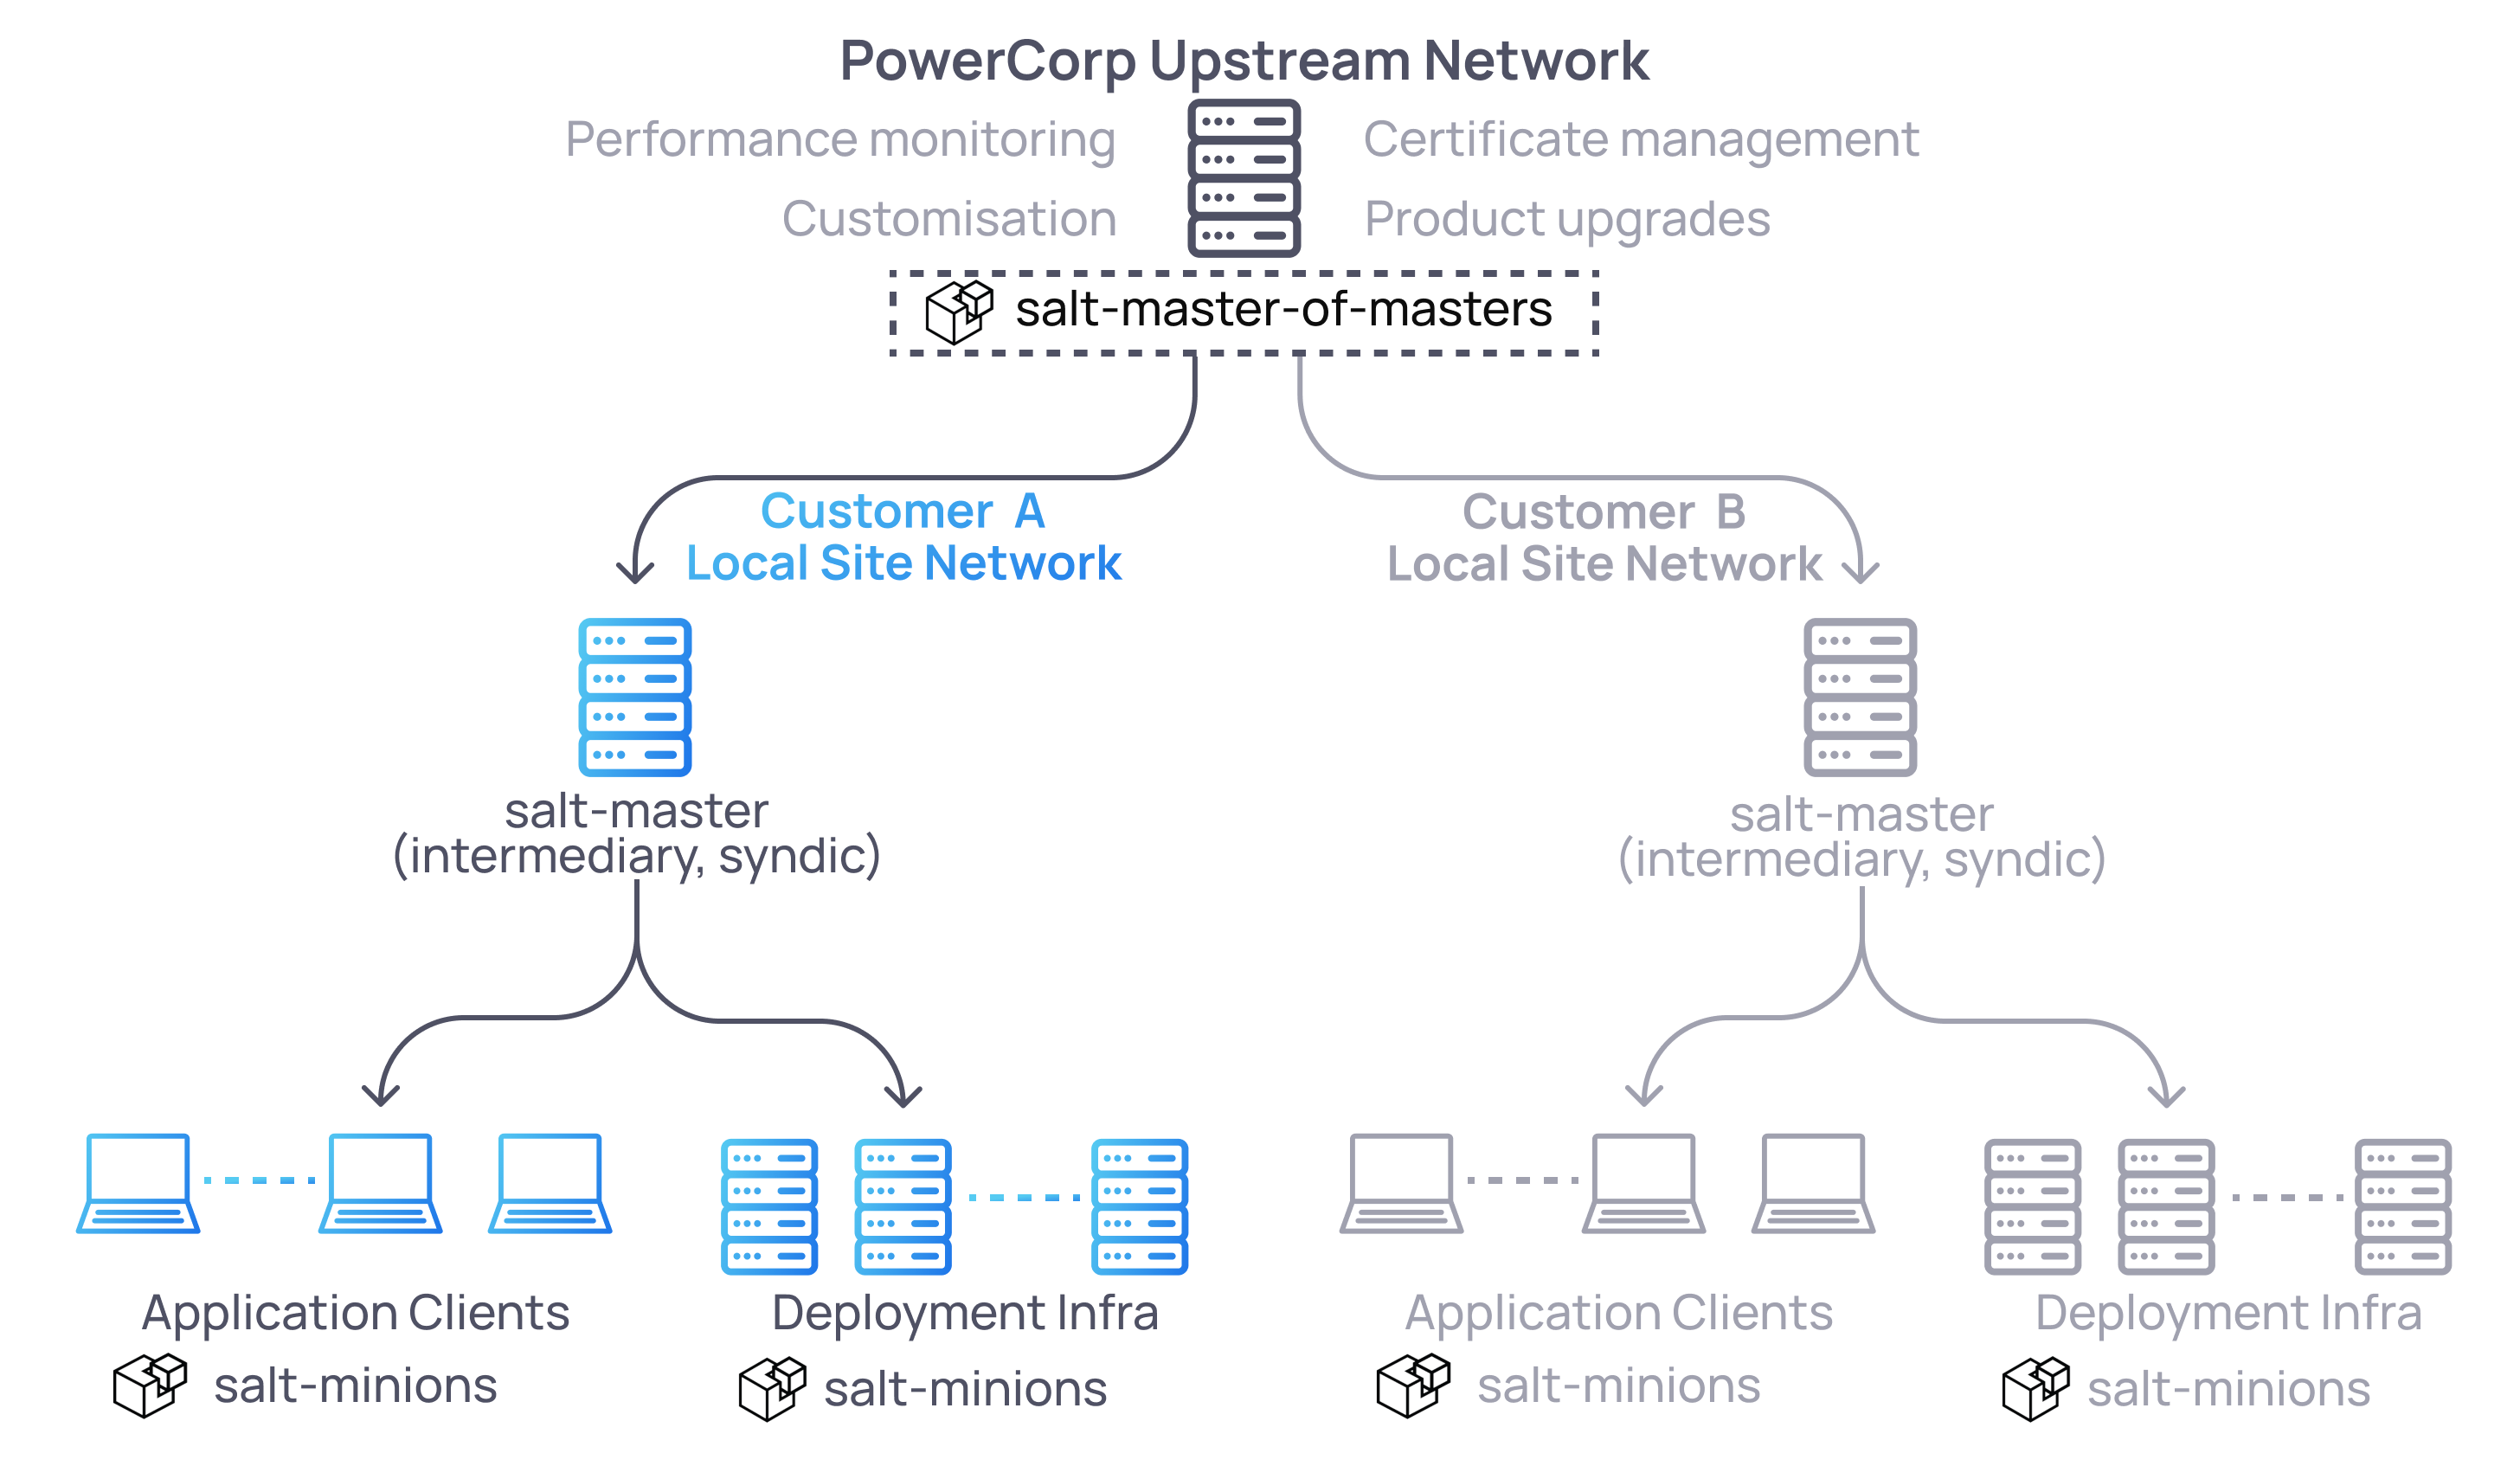 Logical PowerCorp network architecture